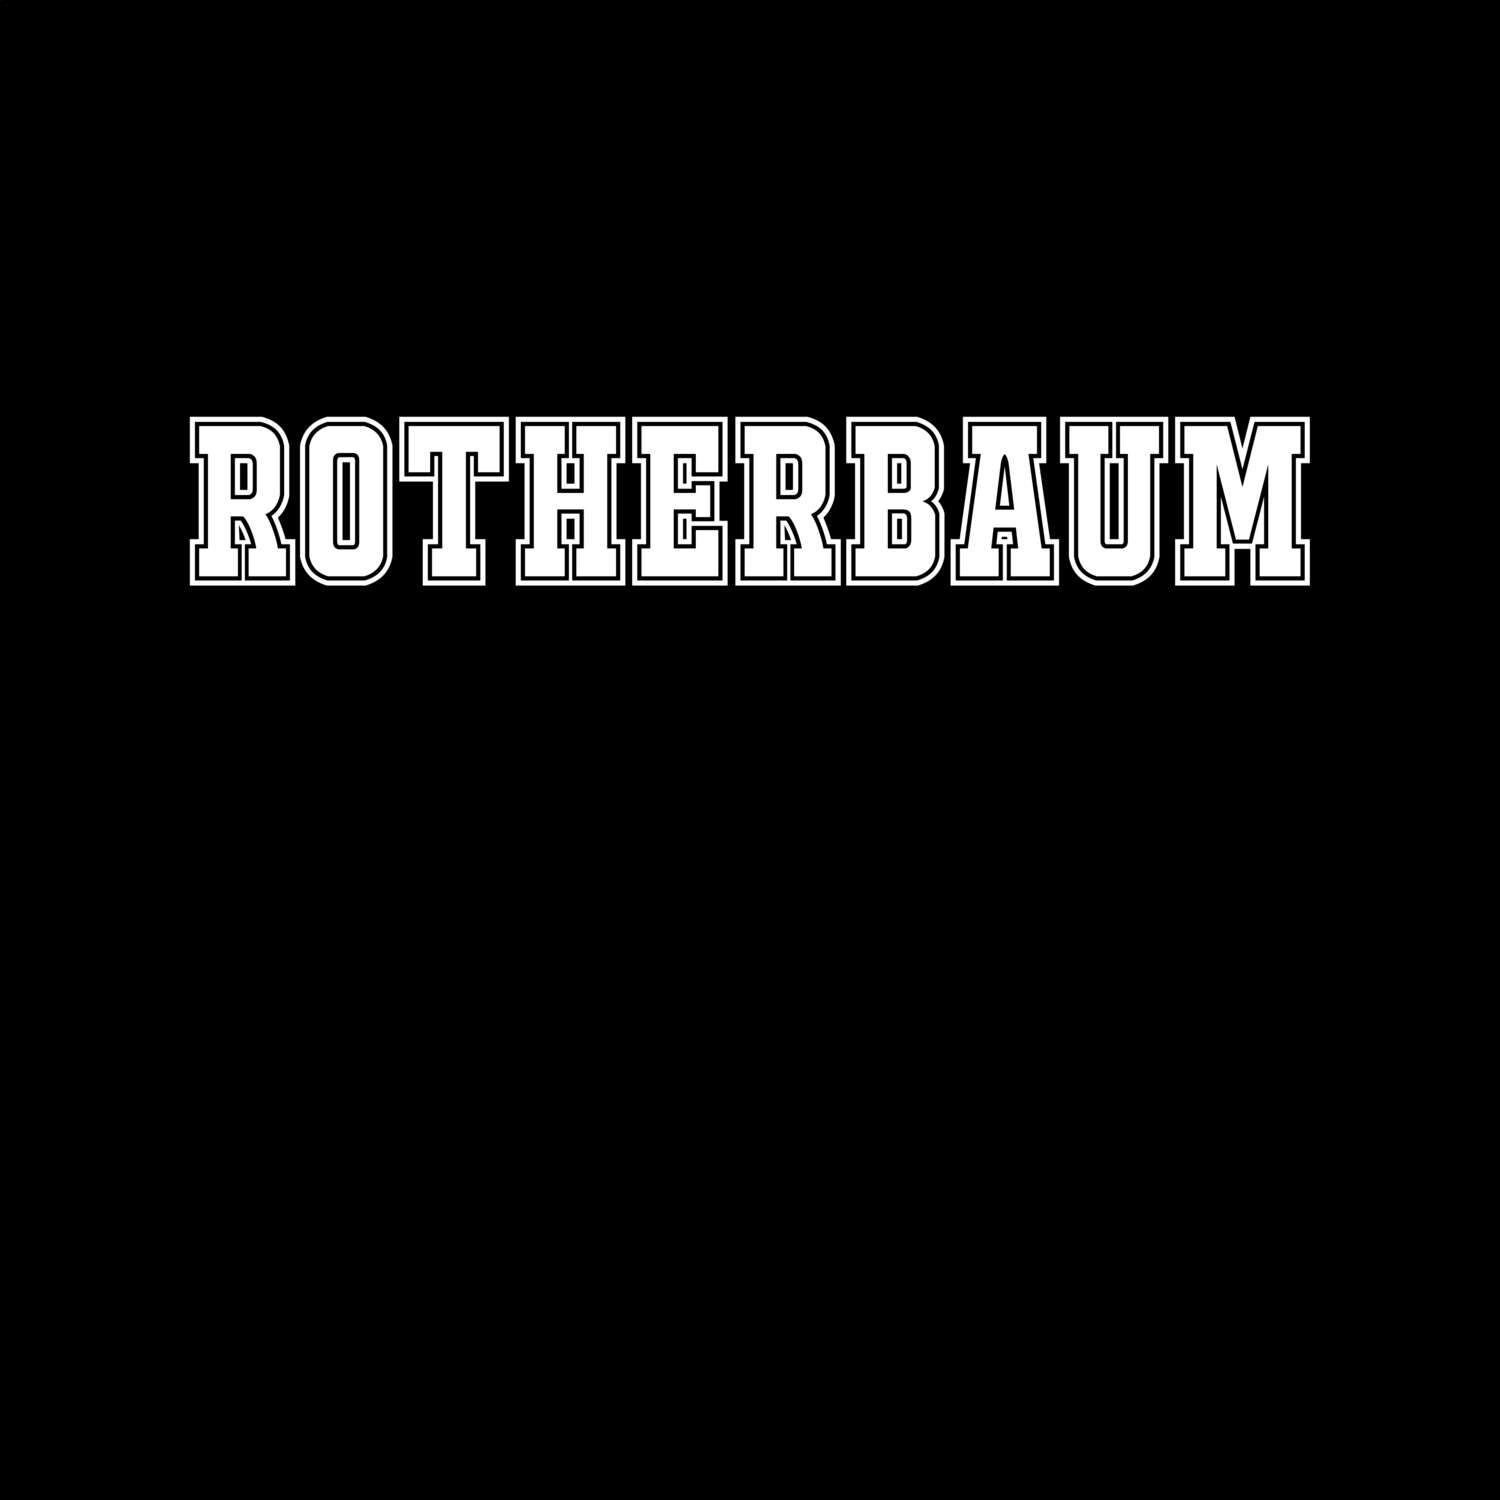 Rotherbaum T-Shirt »Classic«